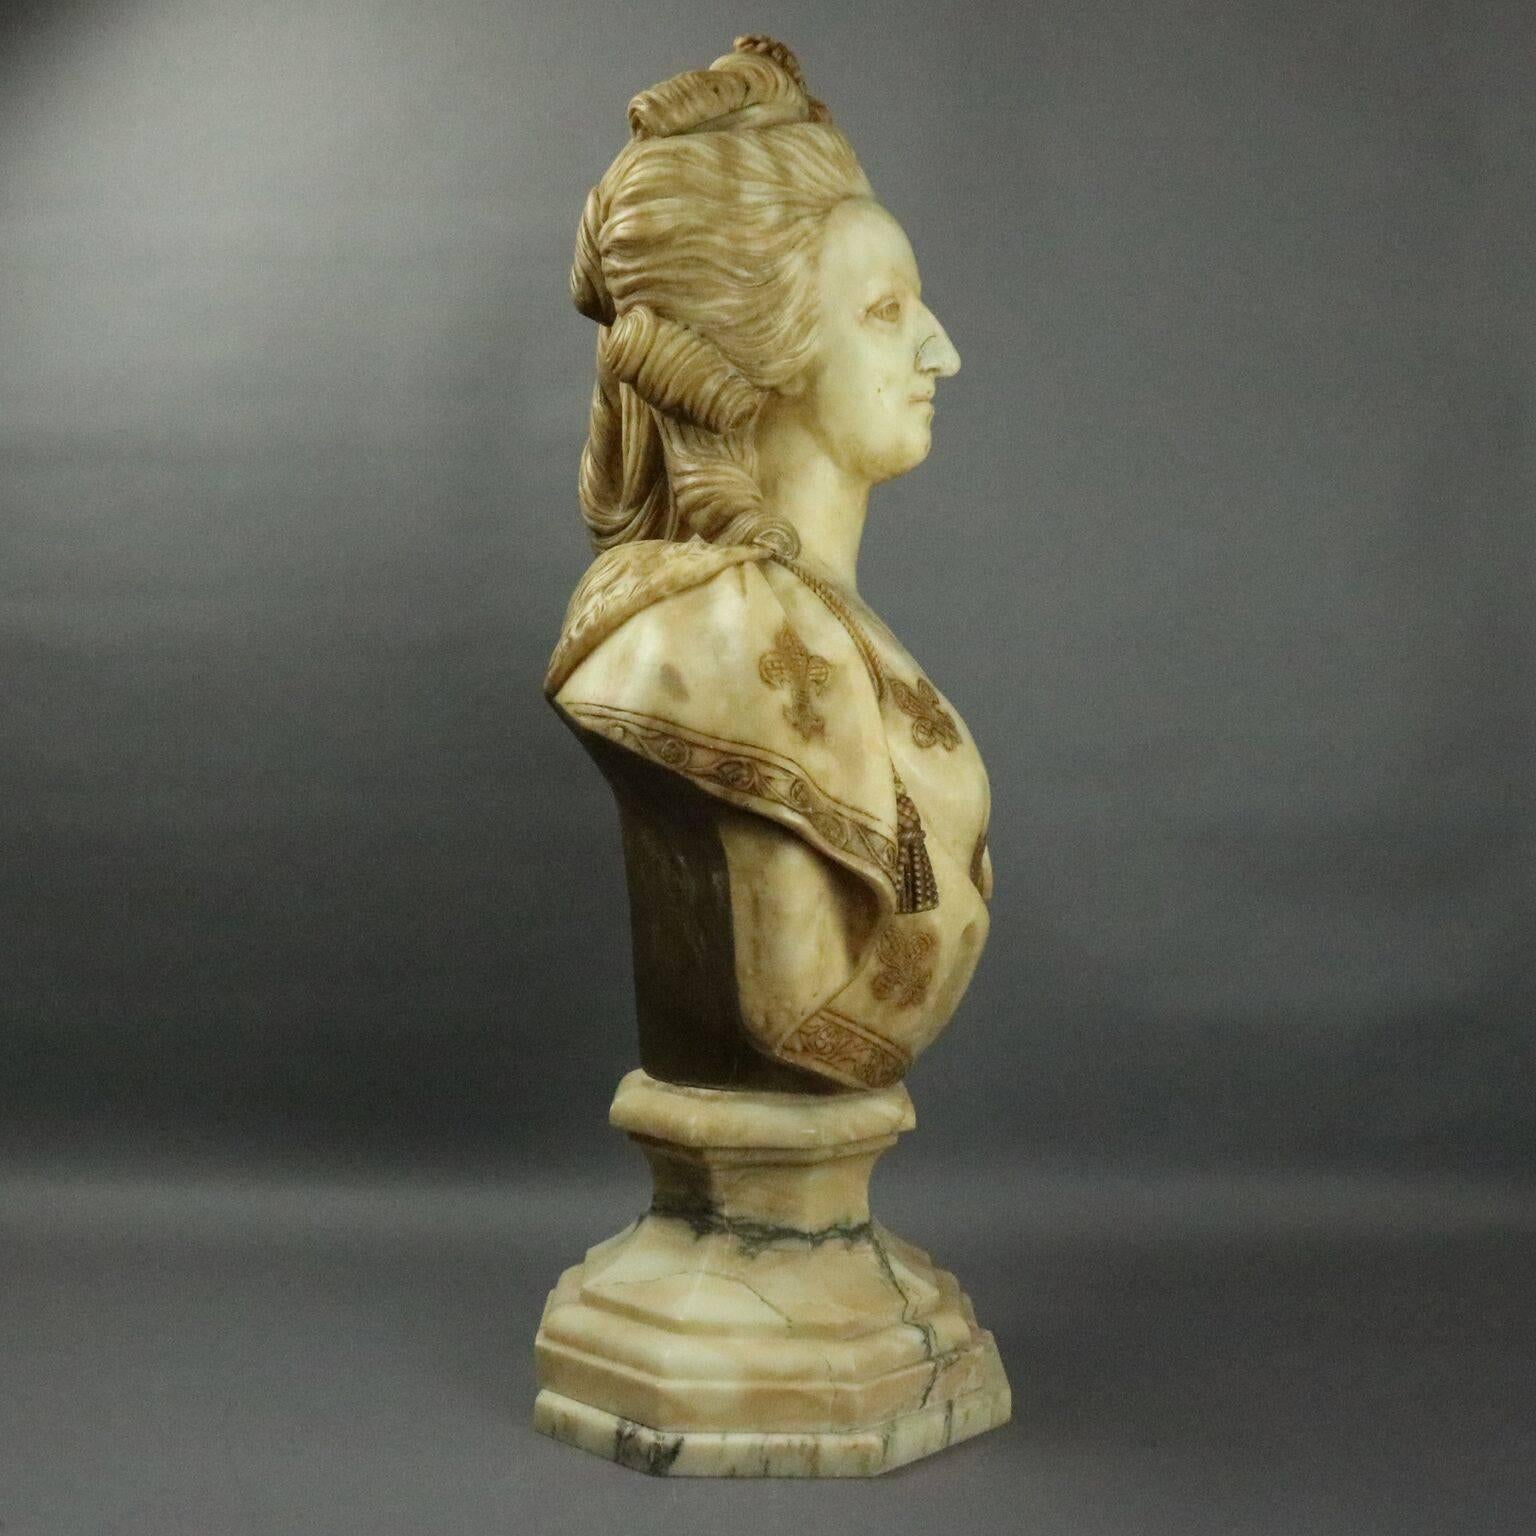 Neoclassical Antique Italian Carved Marble Bust after Houdon of Marie Antoinette, circa 1850